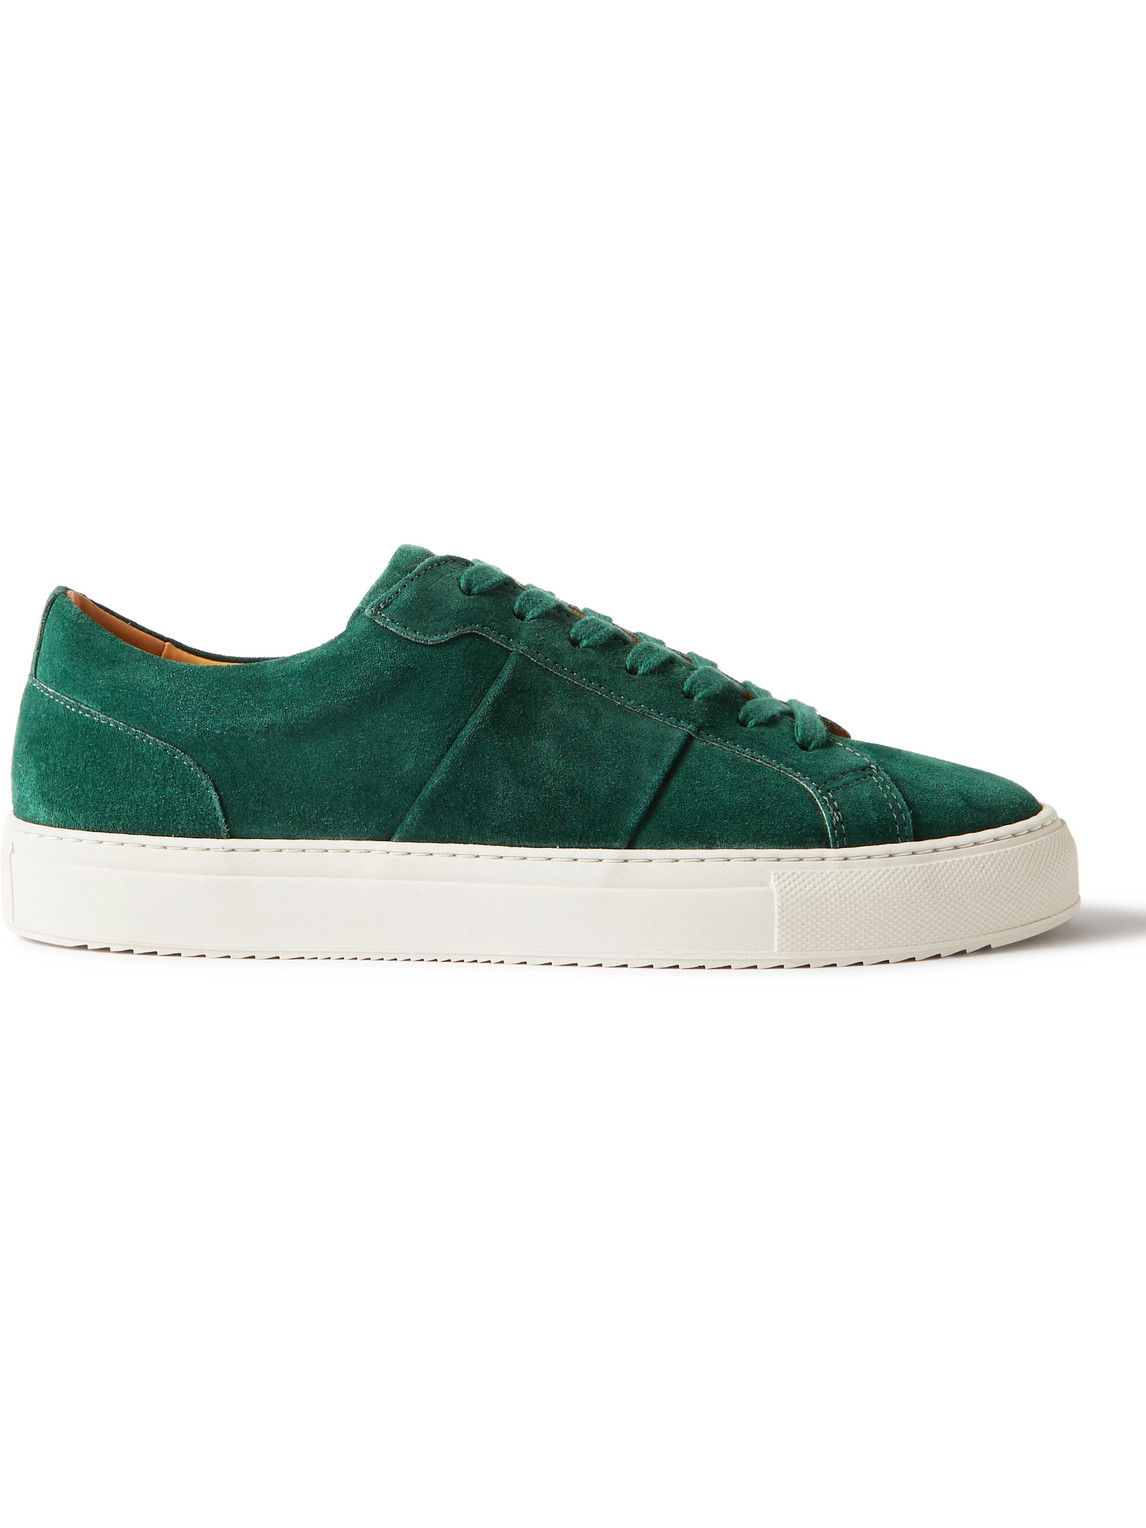 Mr P Alec Regenerated Suede By Evolo® Sneakers In Green